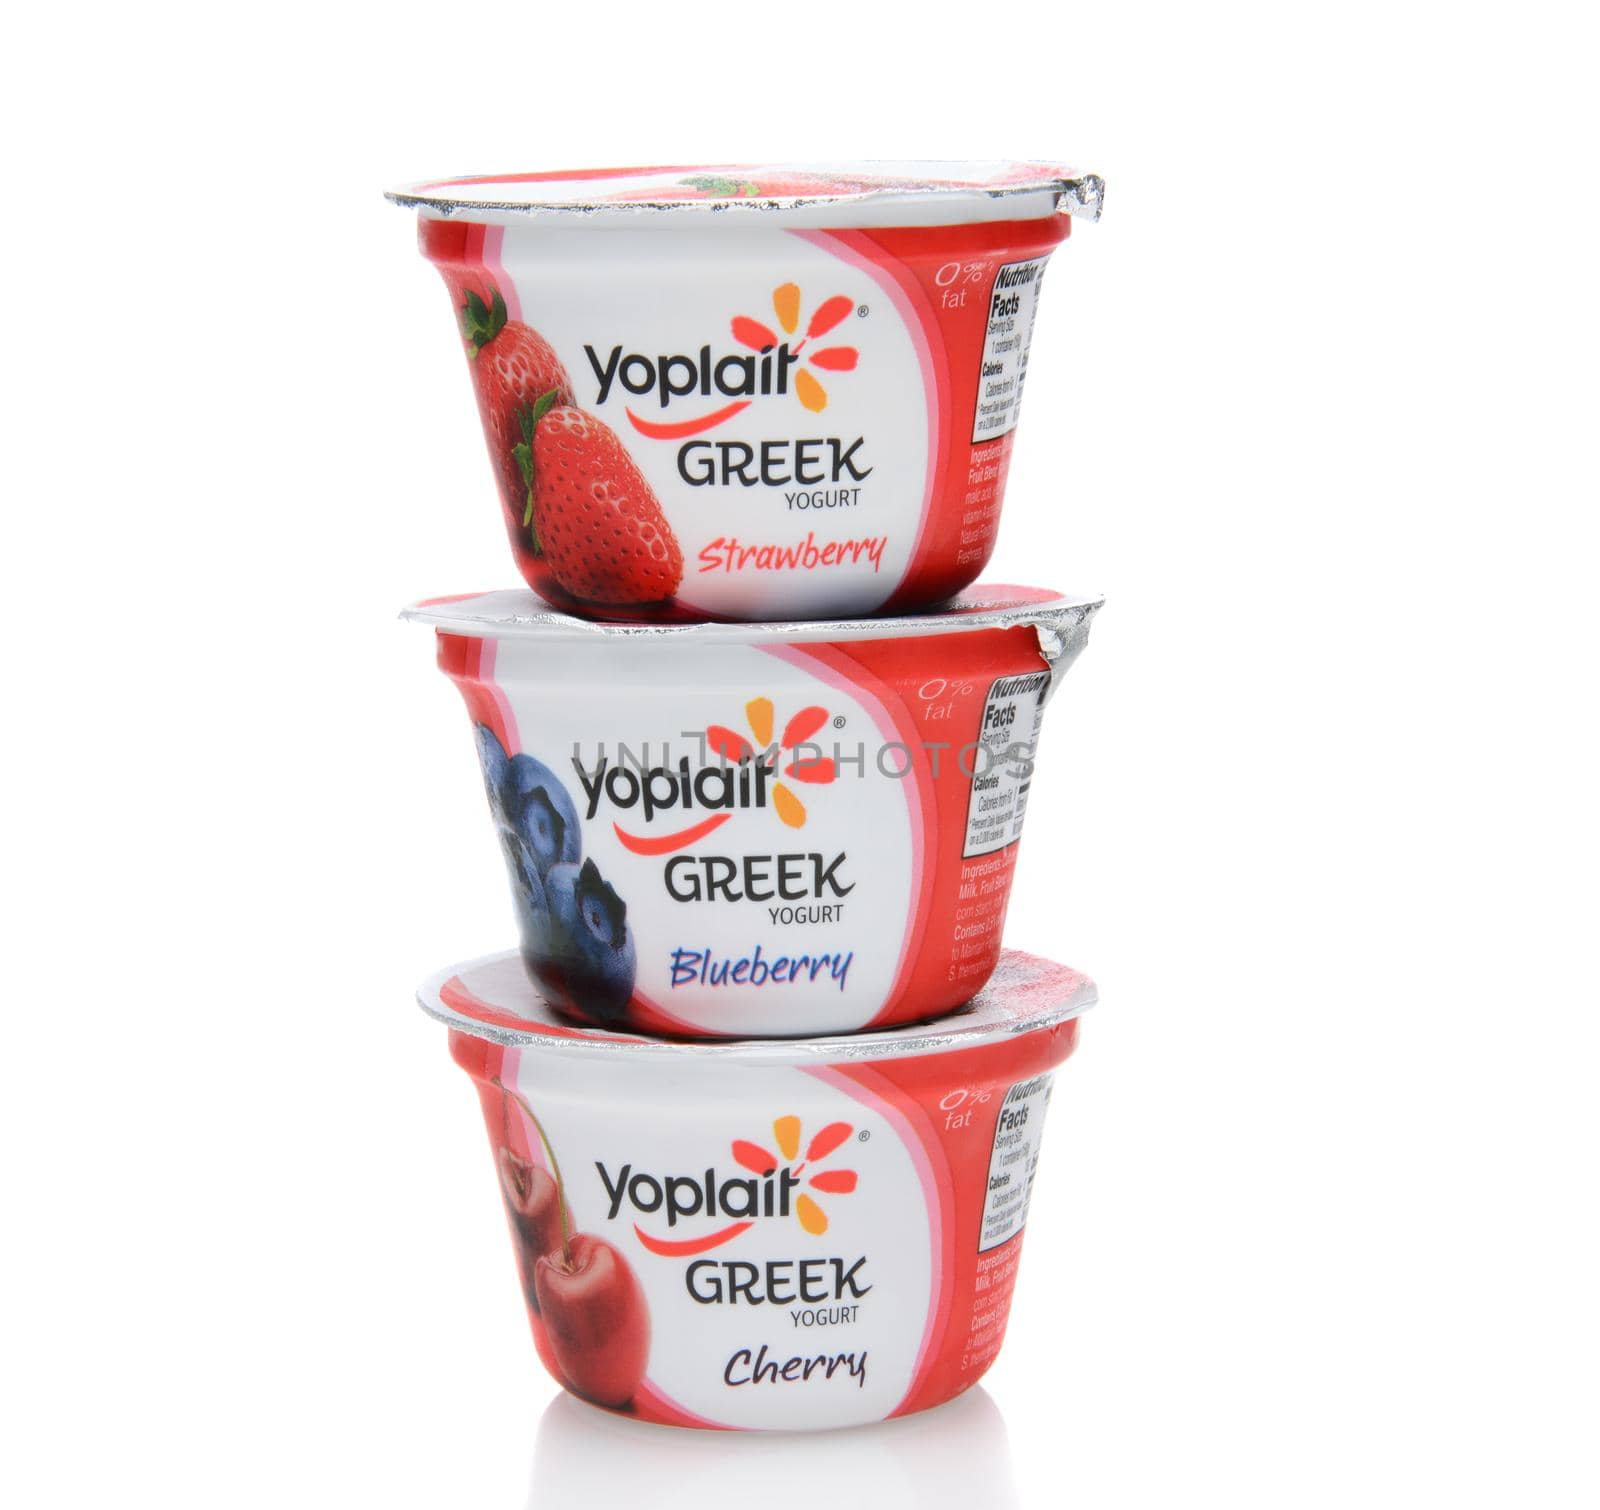 IRVINE, CA - SEPTEMBER 15, 2014: Three different containers of Yoplait Greek Yogurt. In 1965, two French dairy co-operatives, Yola and Coplait, merged, becoming Yoplait.